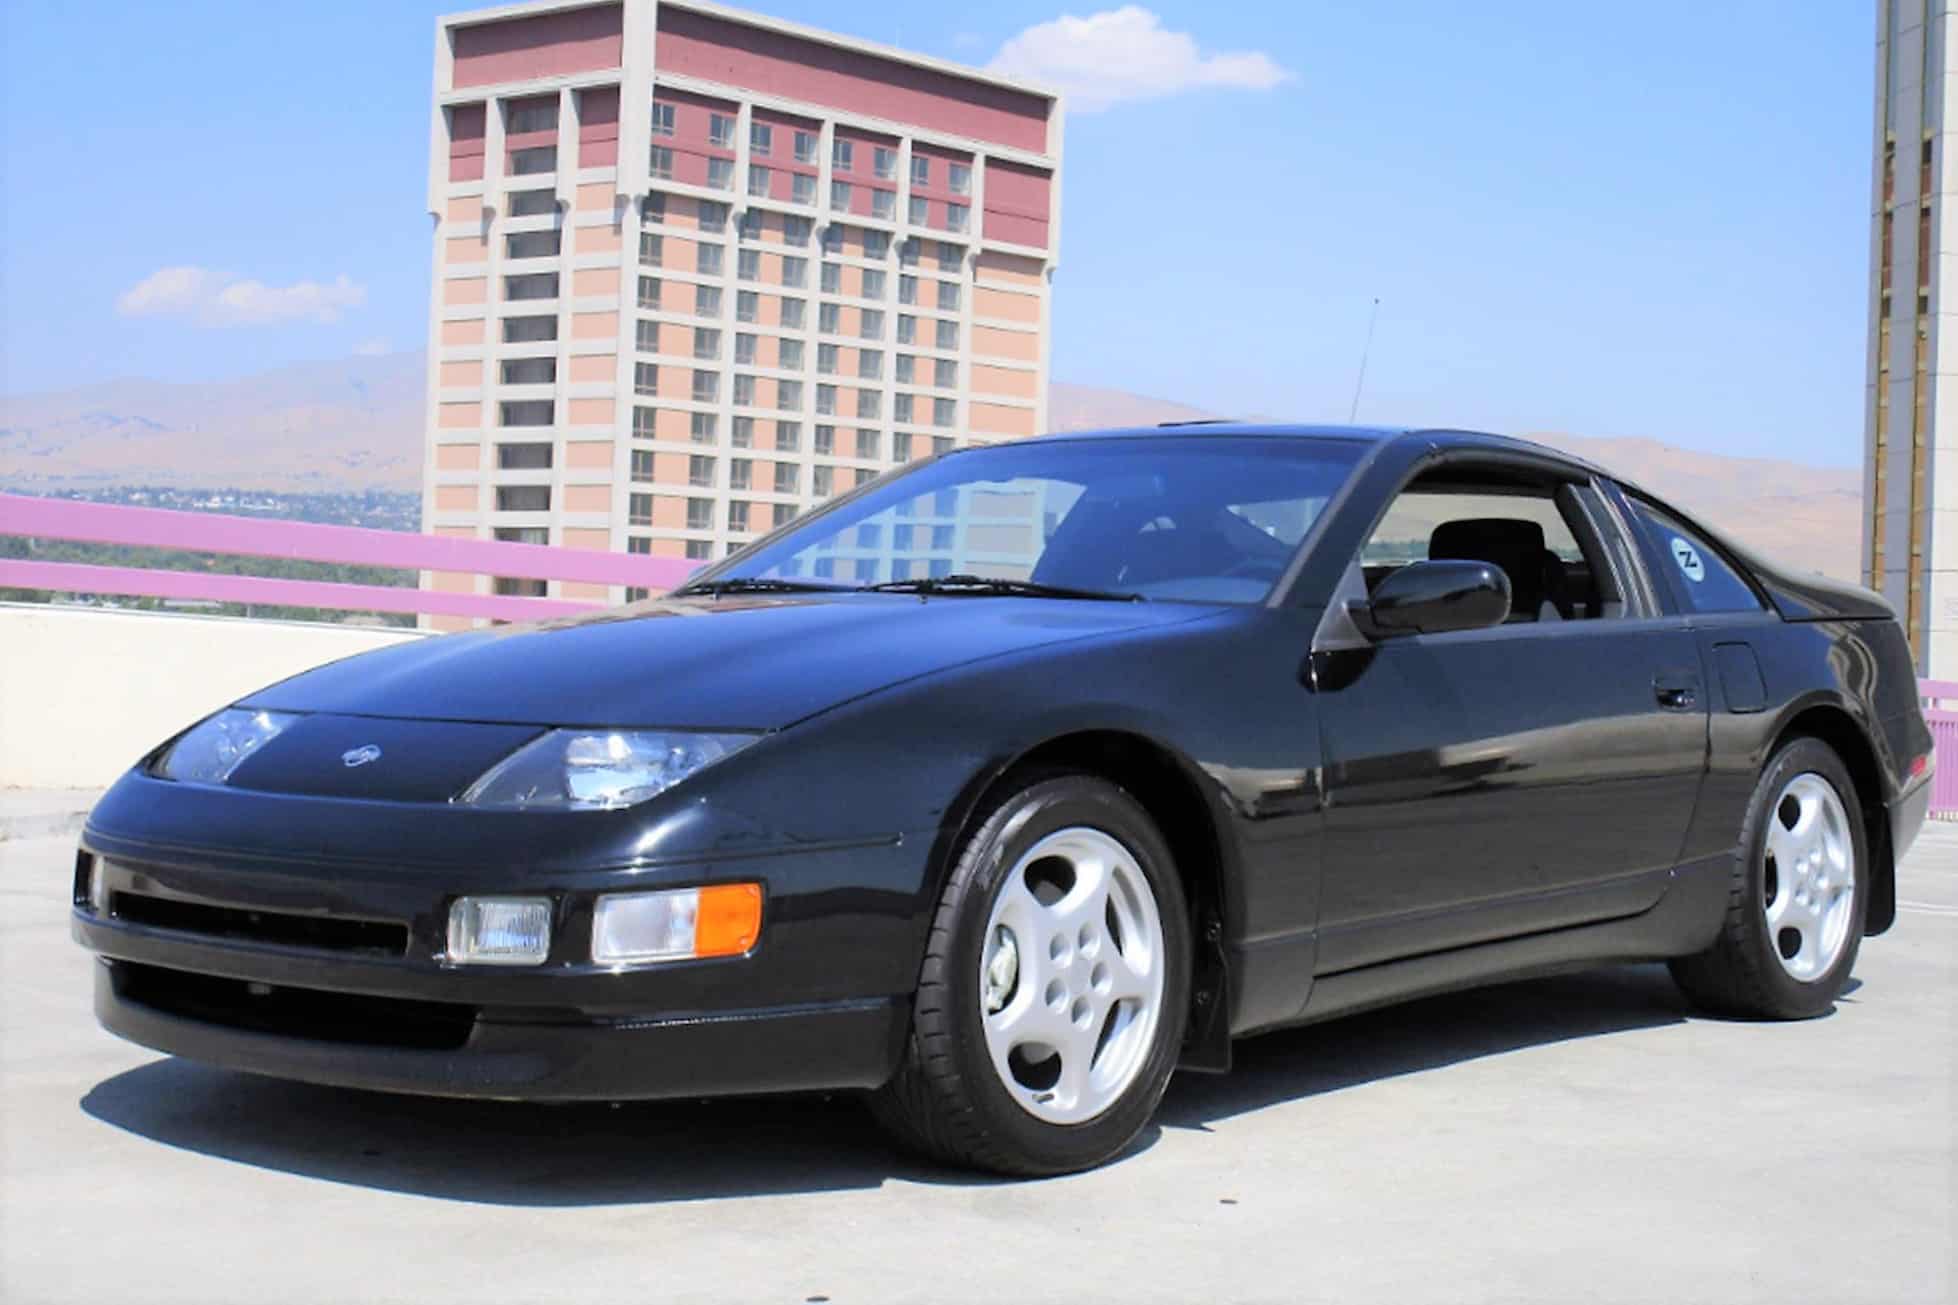 Pick of the Day: 1996 Nissan 300ZX that commemorates the original Z car